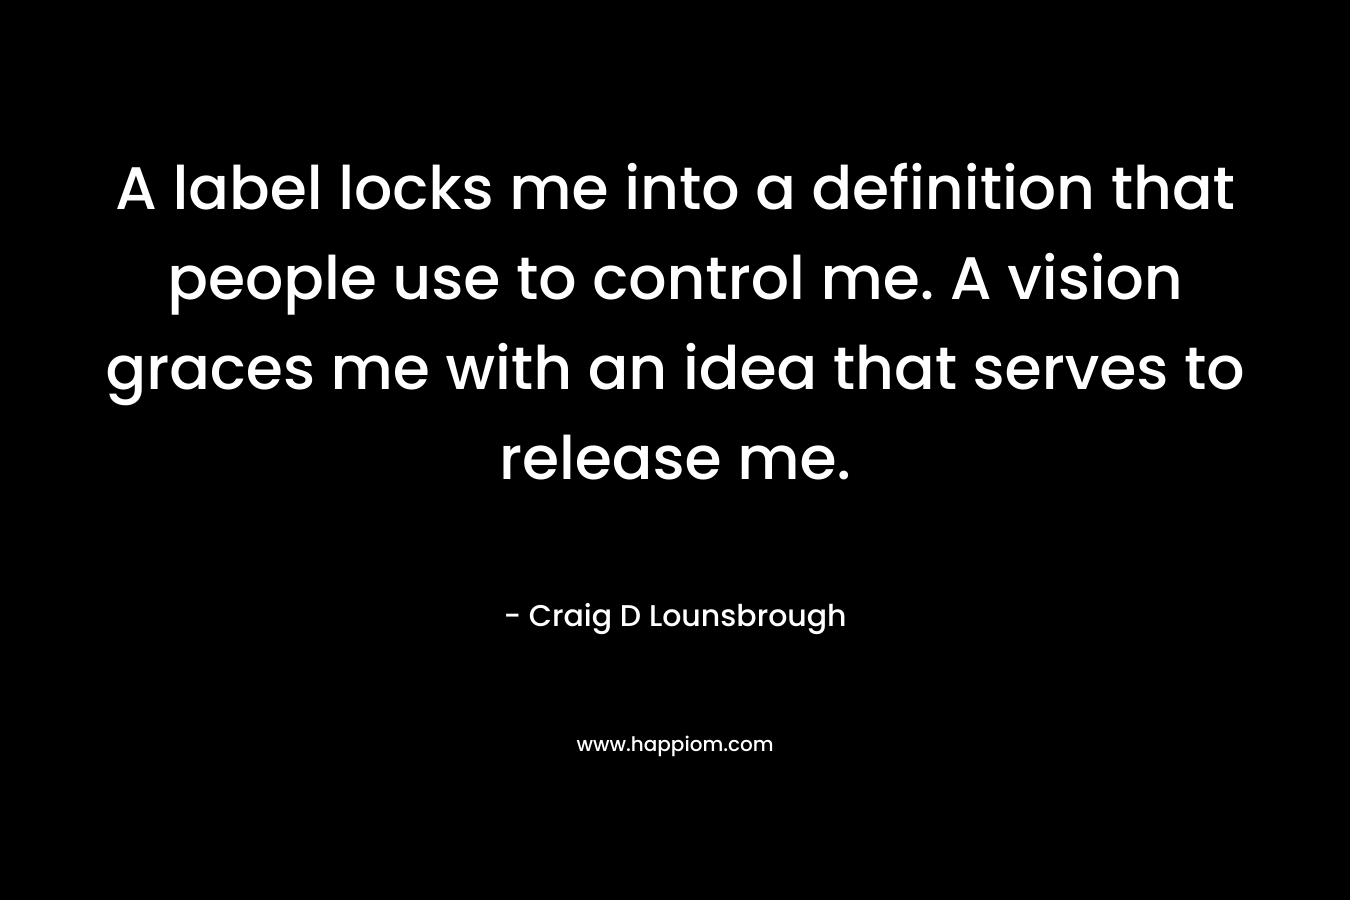 A label locks me into a definition that people use to control me. A vision graces me with an idea that serves to release me. – Craig D Lounsbrough